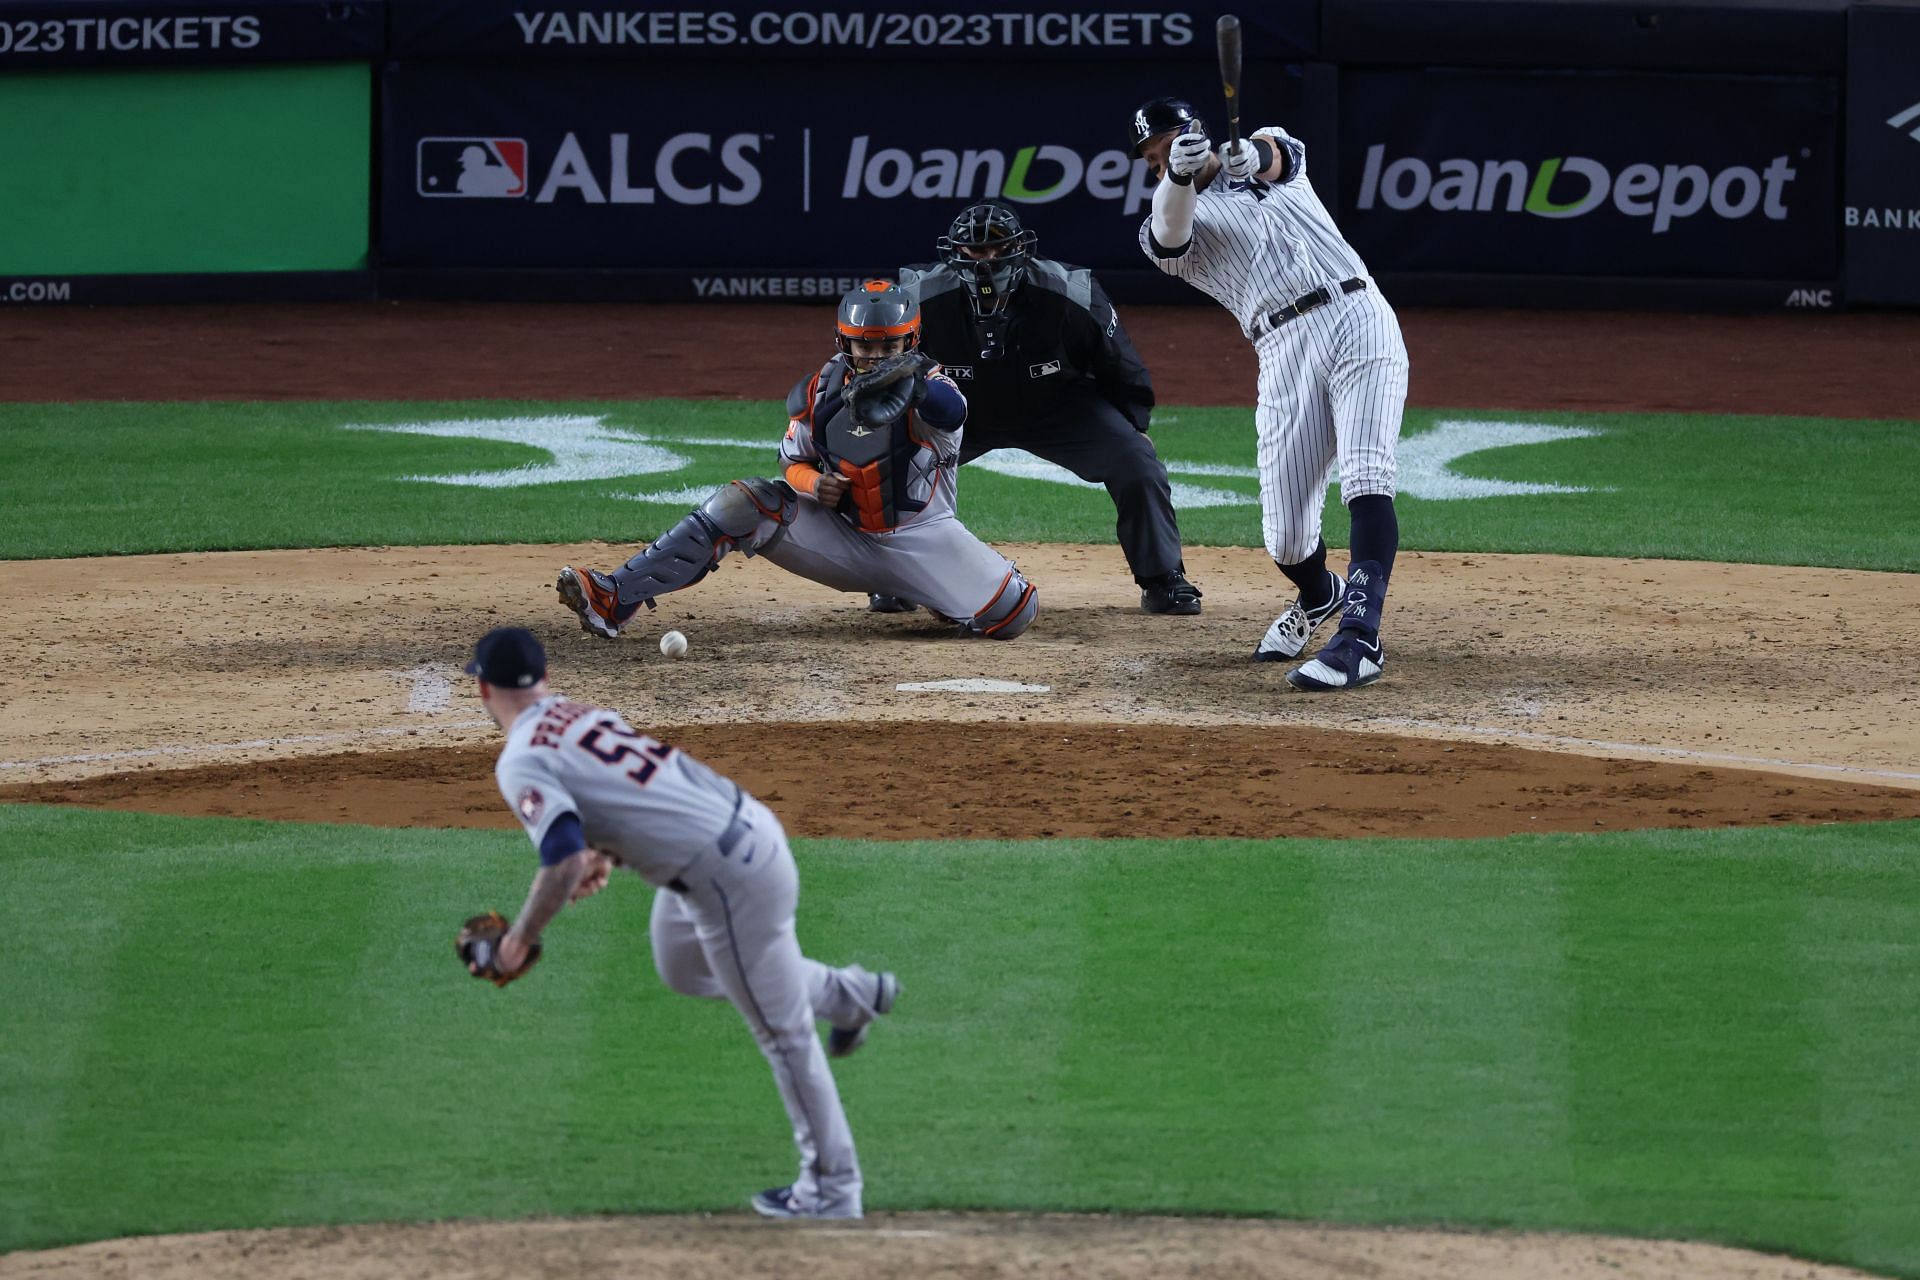 Aaron Judge of the New York Yankees hits the ball for the final out in game four of the American League Championship Series against the Houston Astros.